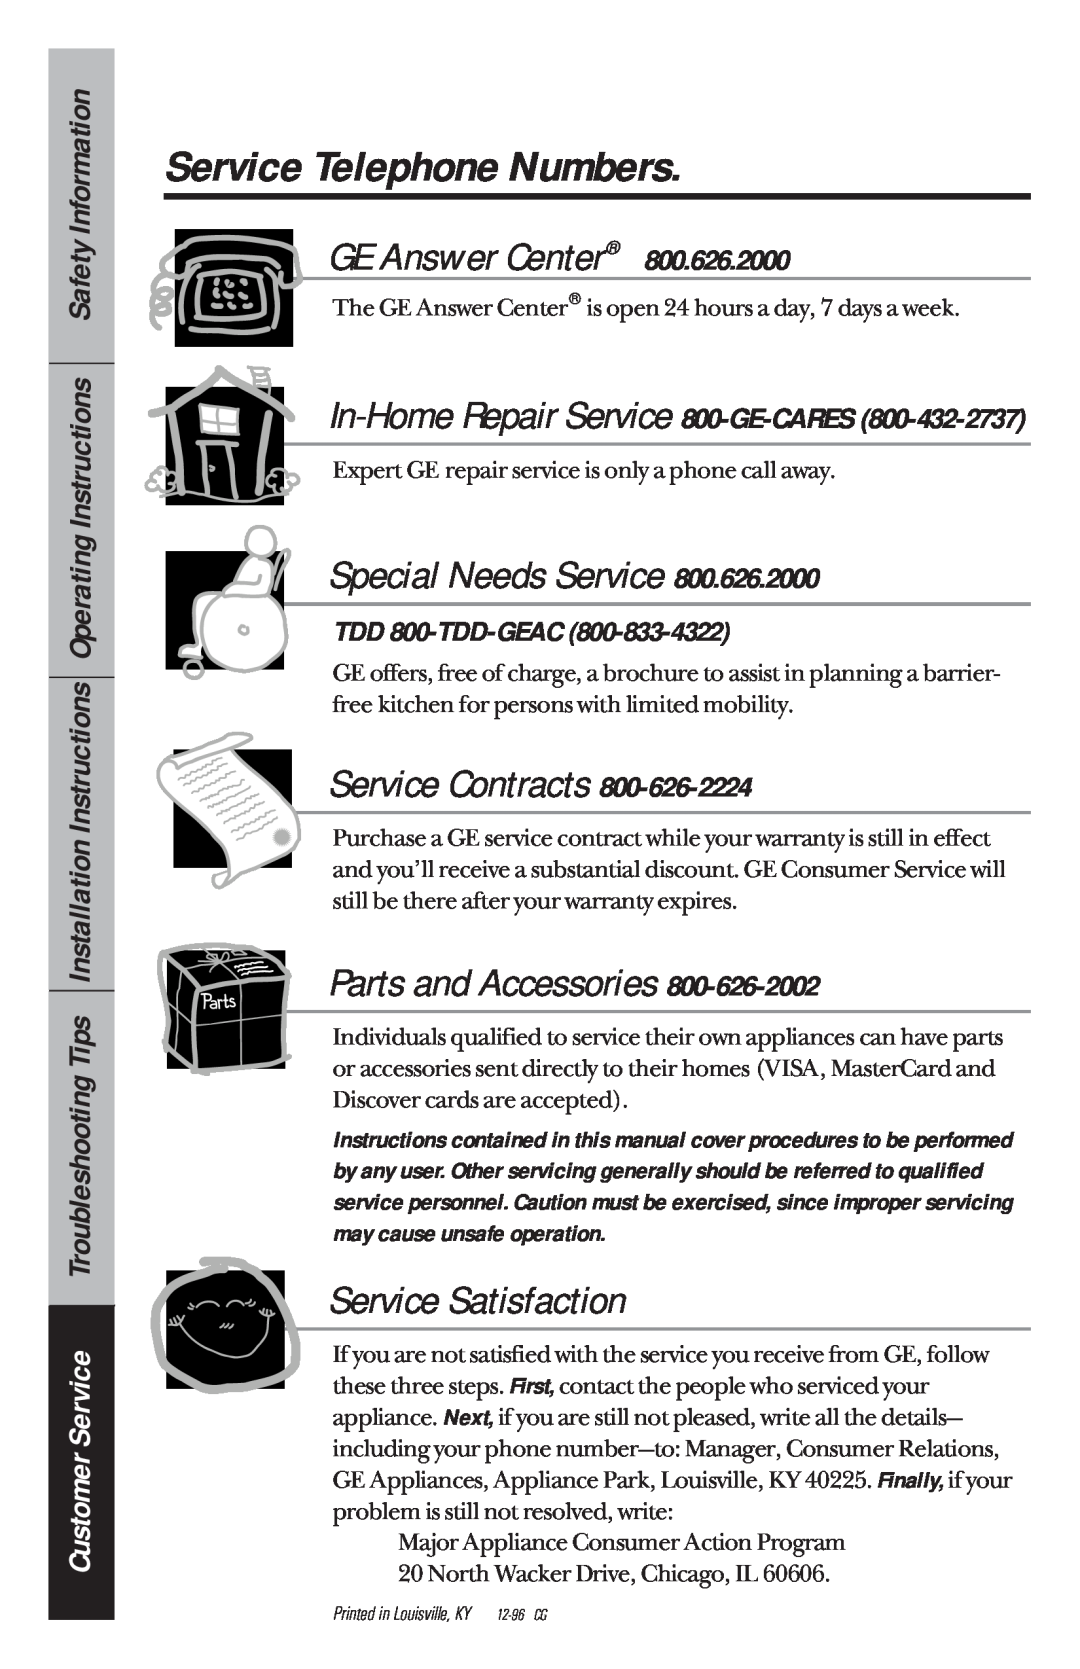 GE 49-8780 manual Service Telephone Numbers, In-Home Repair Service 800-GE-CARES, TDD 800-TDD-GEAC, GE Answer Center 